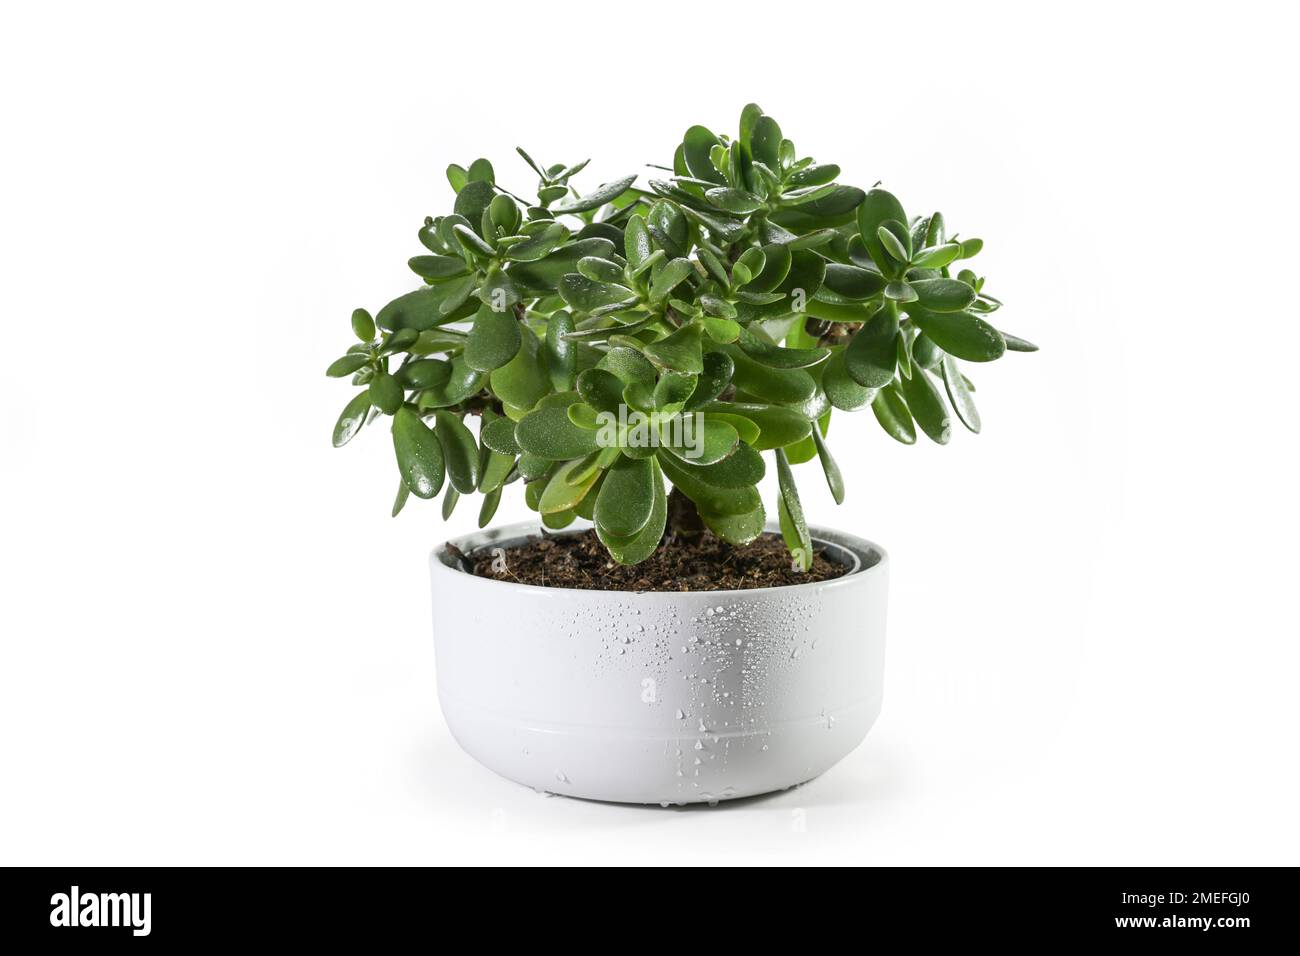 Money tree (Crassula ovata) succulent plant with thick leaves potted as decorative houseplant in a wide ceramic planter, isolated with small shadows o Stock Photo